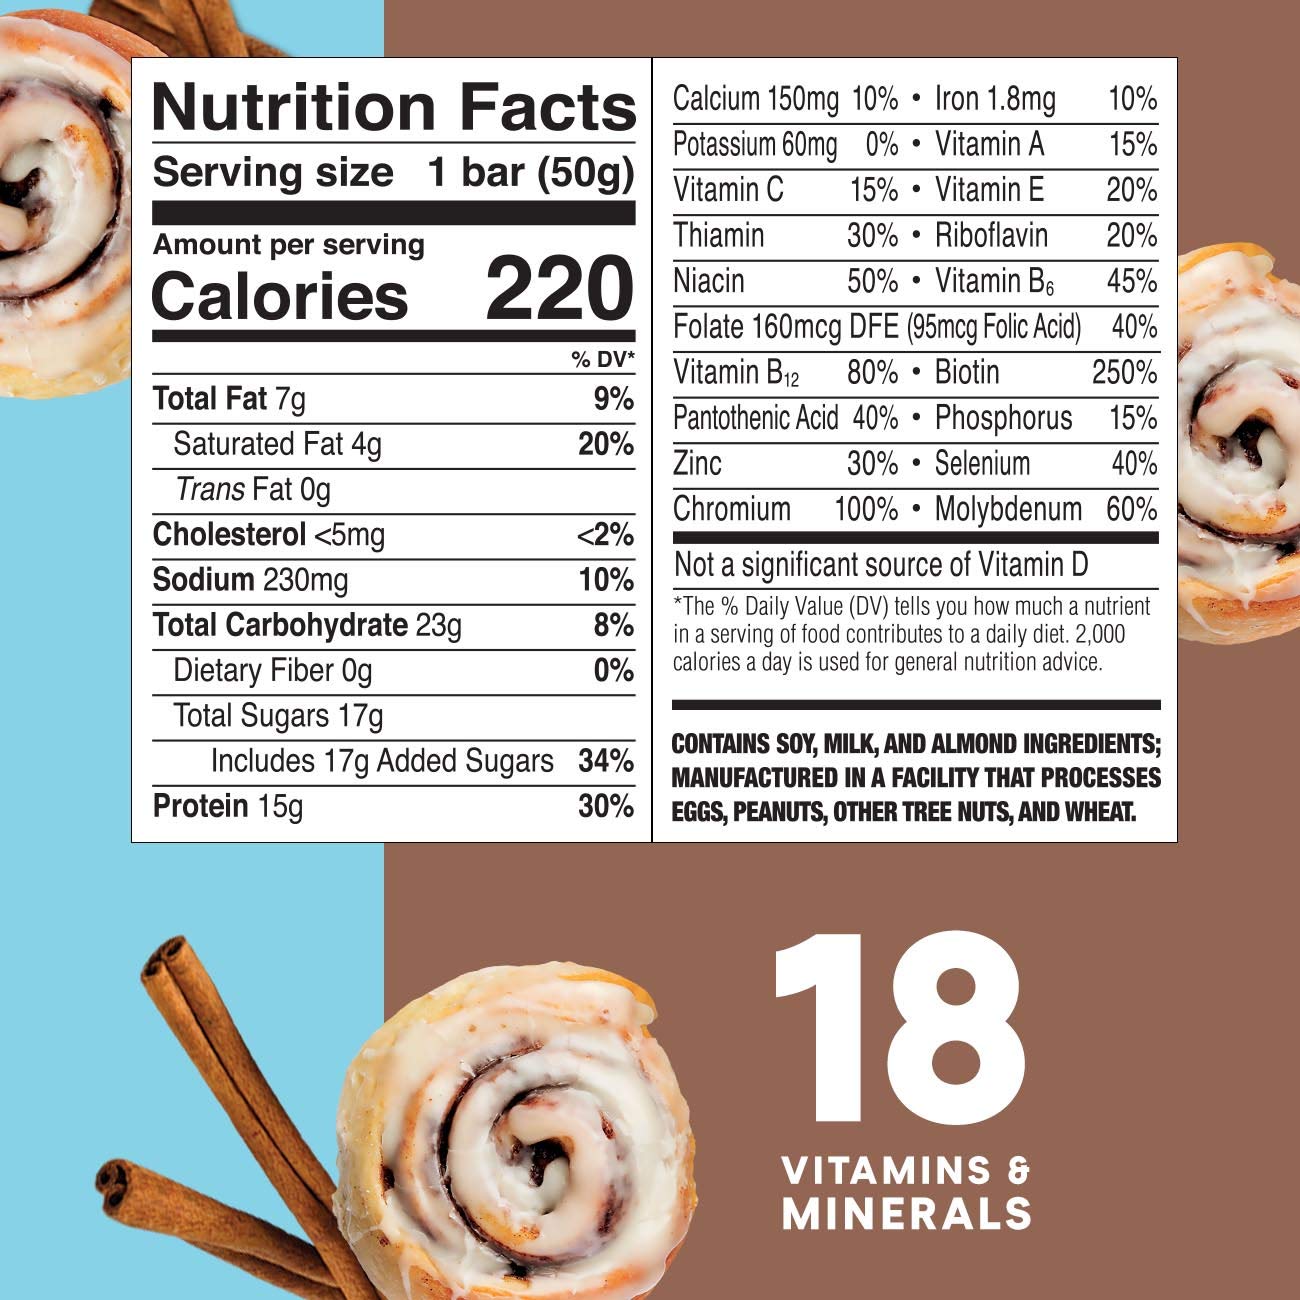 ZonePerfect Protein Bars, 18 vitamins & minerals, 15g protein, Nutritious Snack Bar, Cinnamon Roll, 30 Count